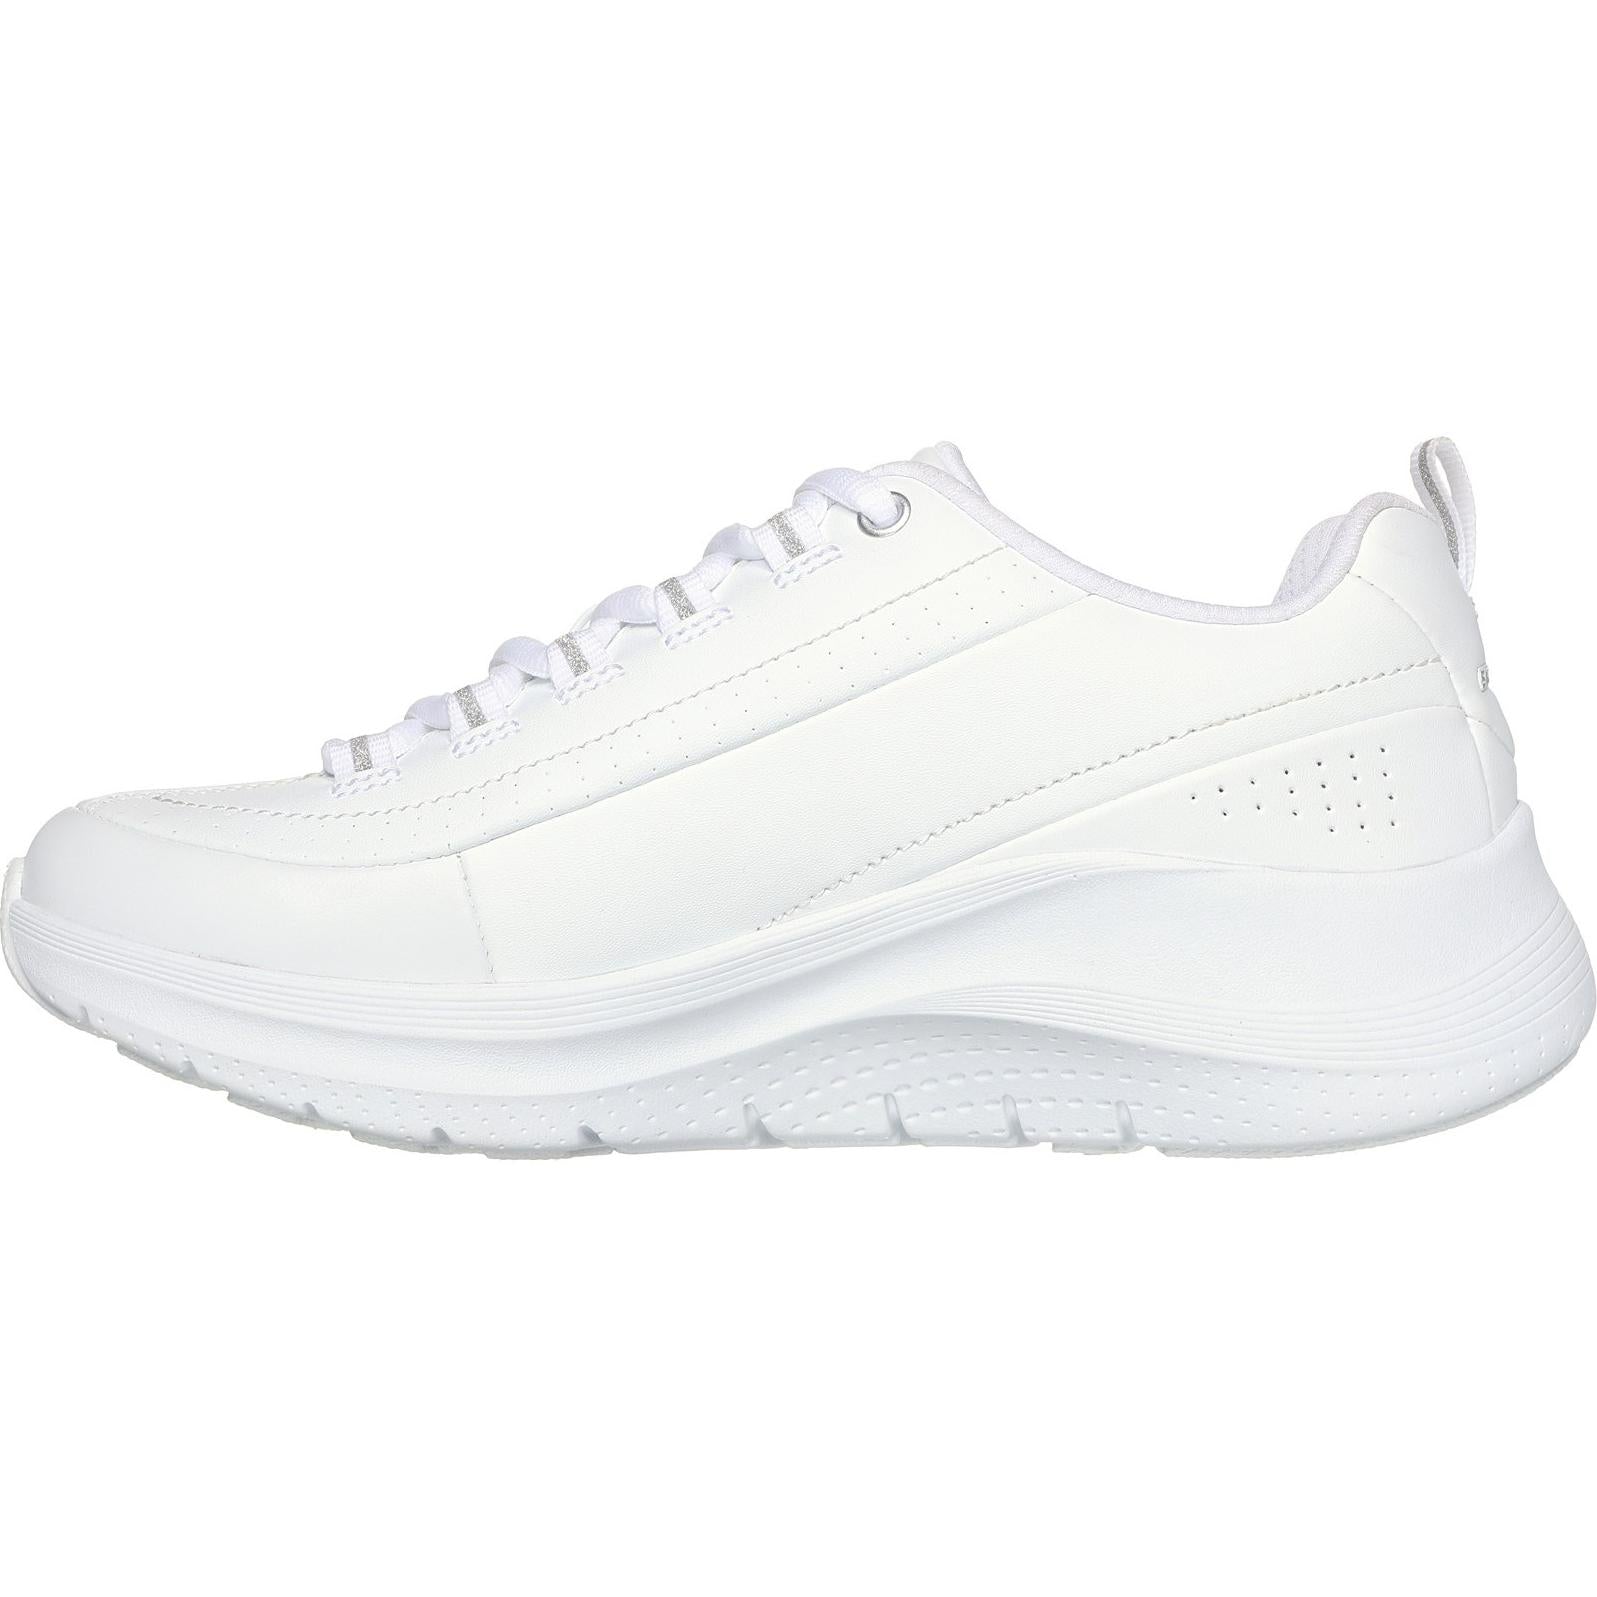 Skechers Arch Fit 2.0 - Star Bound Trainers